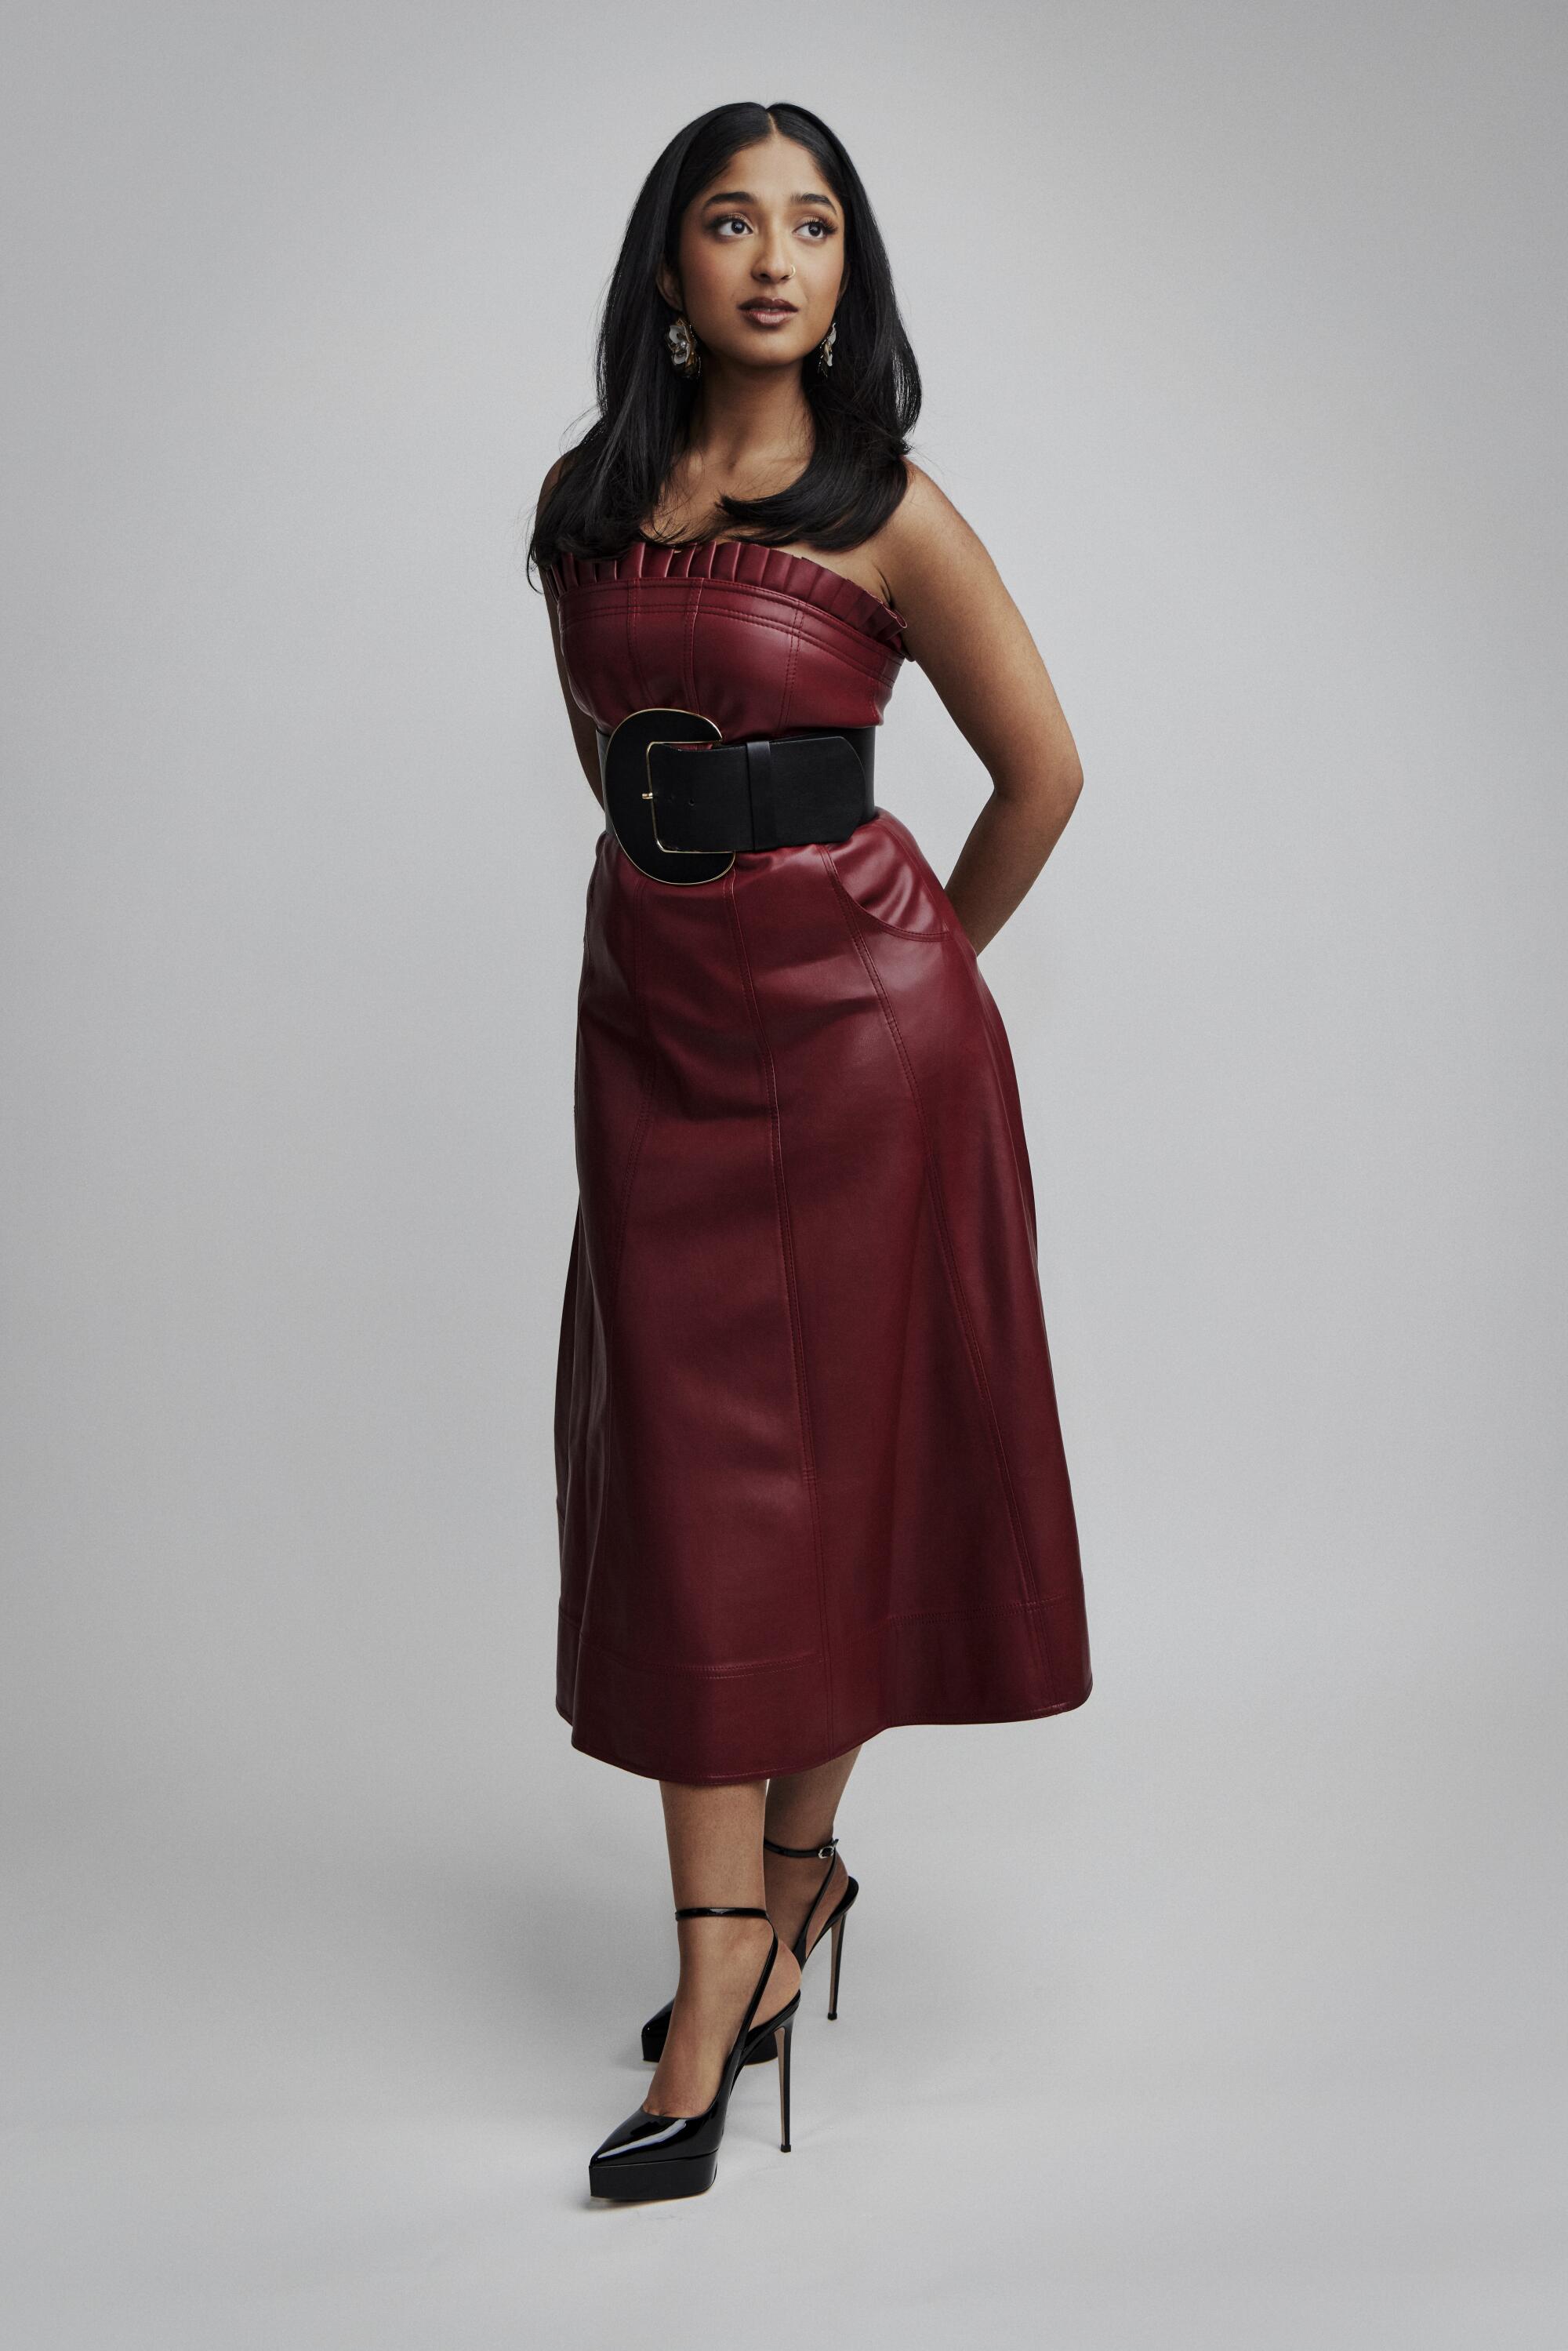 Maitreyi Ramakrishnan stands with her arms behind her back in a strapless maroon dress and heels.